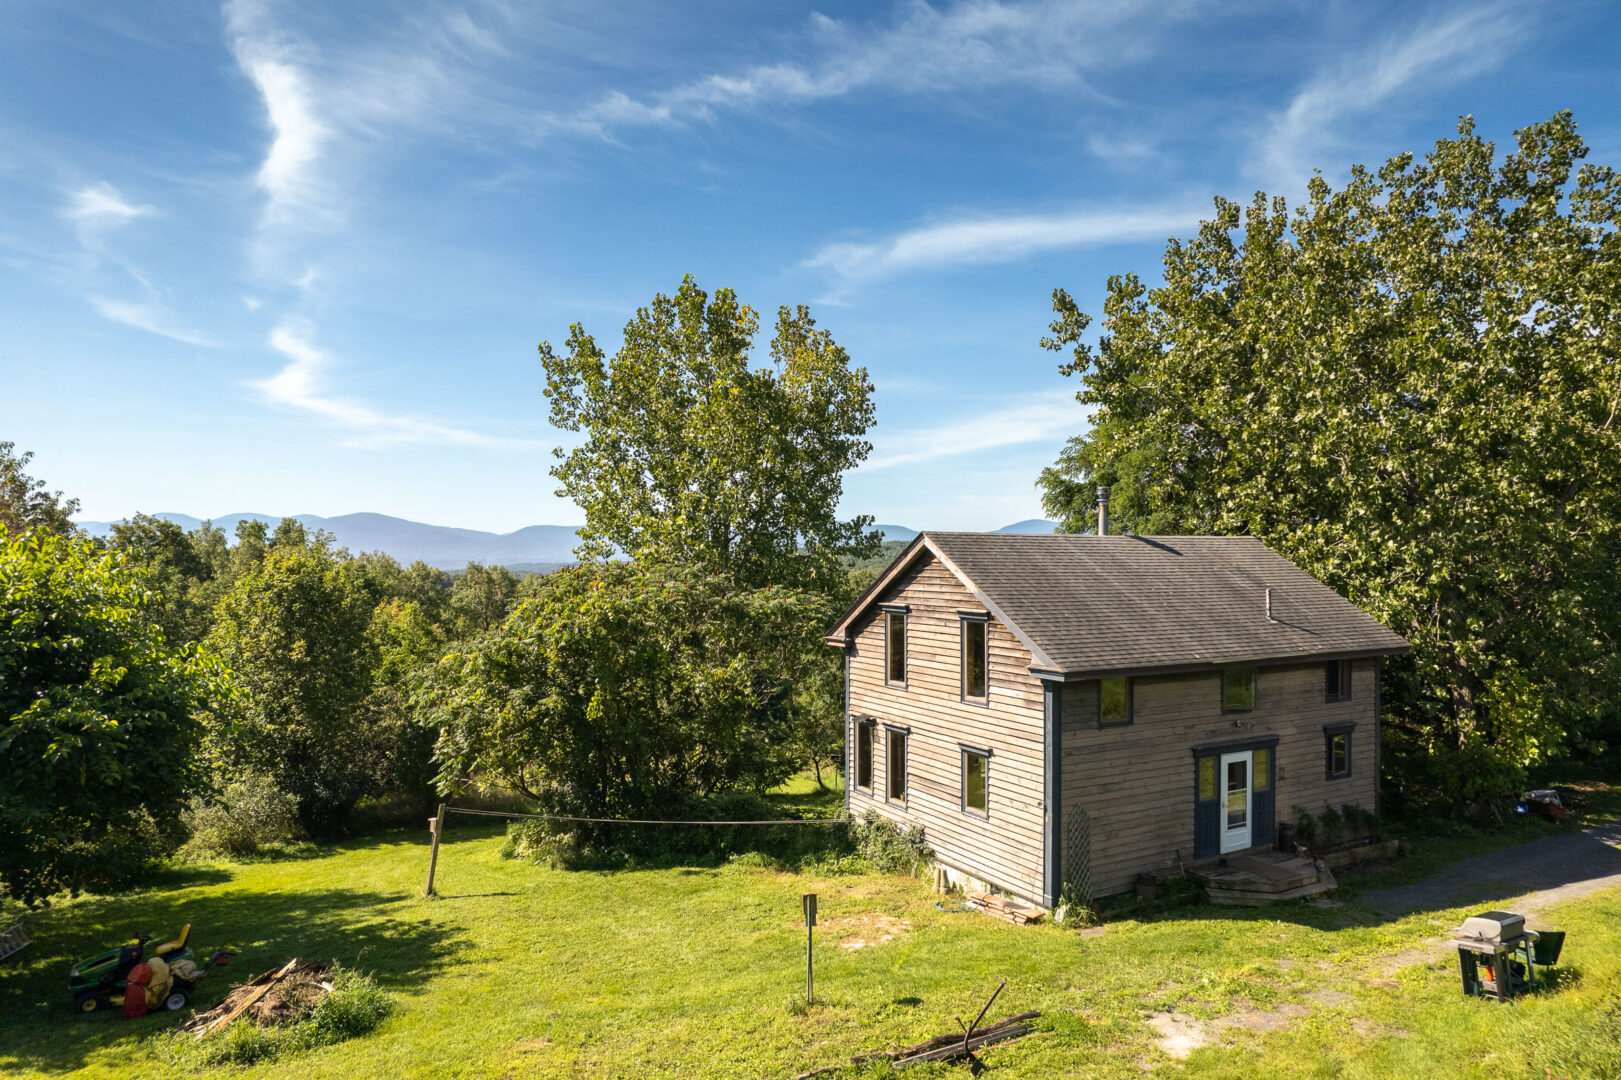 42 Fleming Rd, Rensselaerville. House on a gentle slope facing the Catskill Mountains